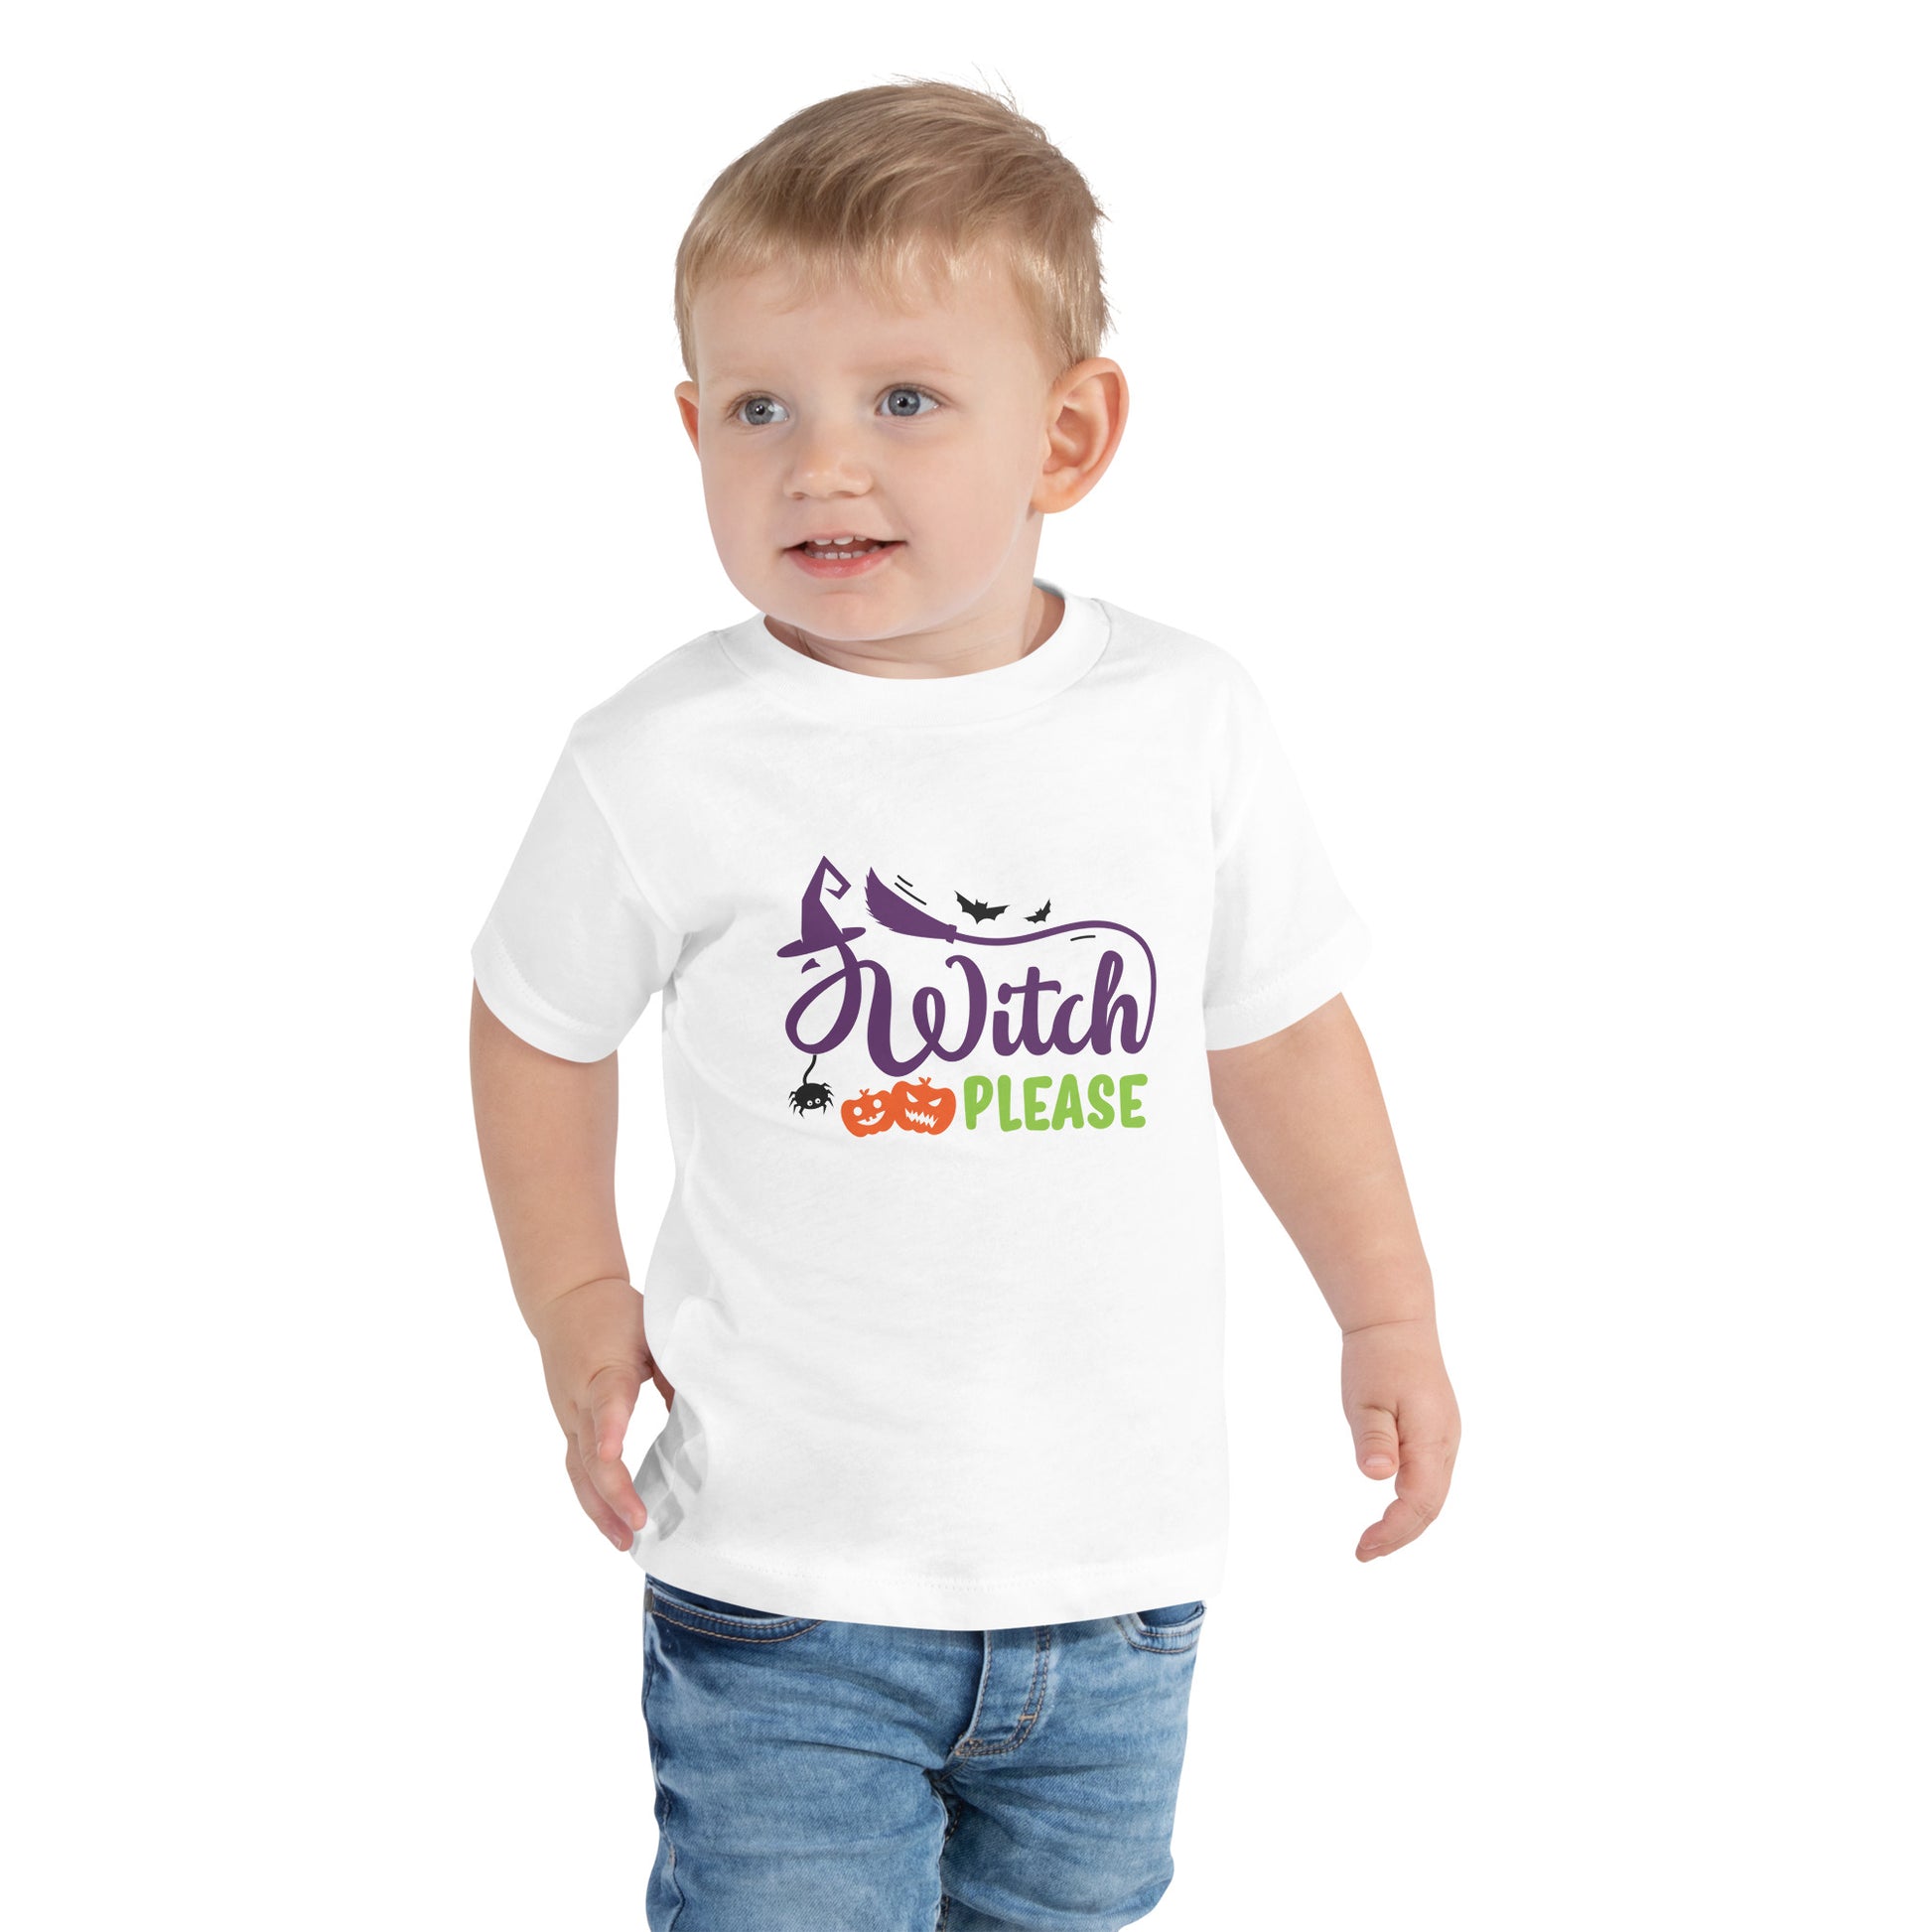 Witch Please Toddler Short Sleeve Tee